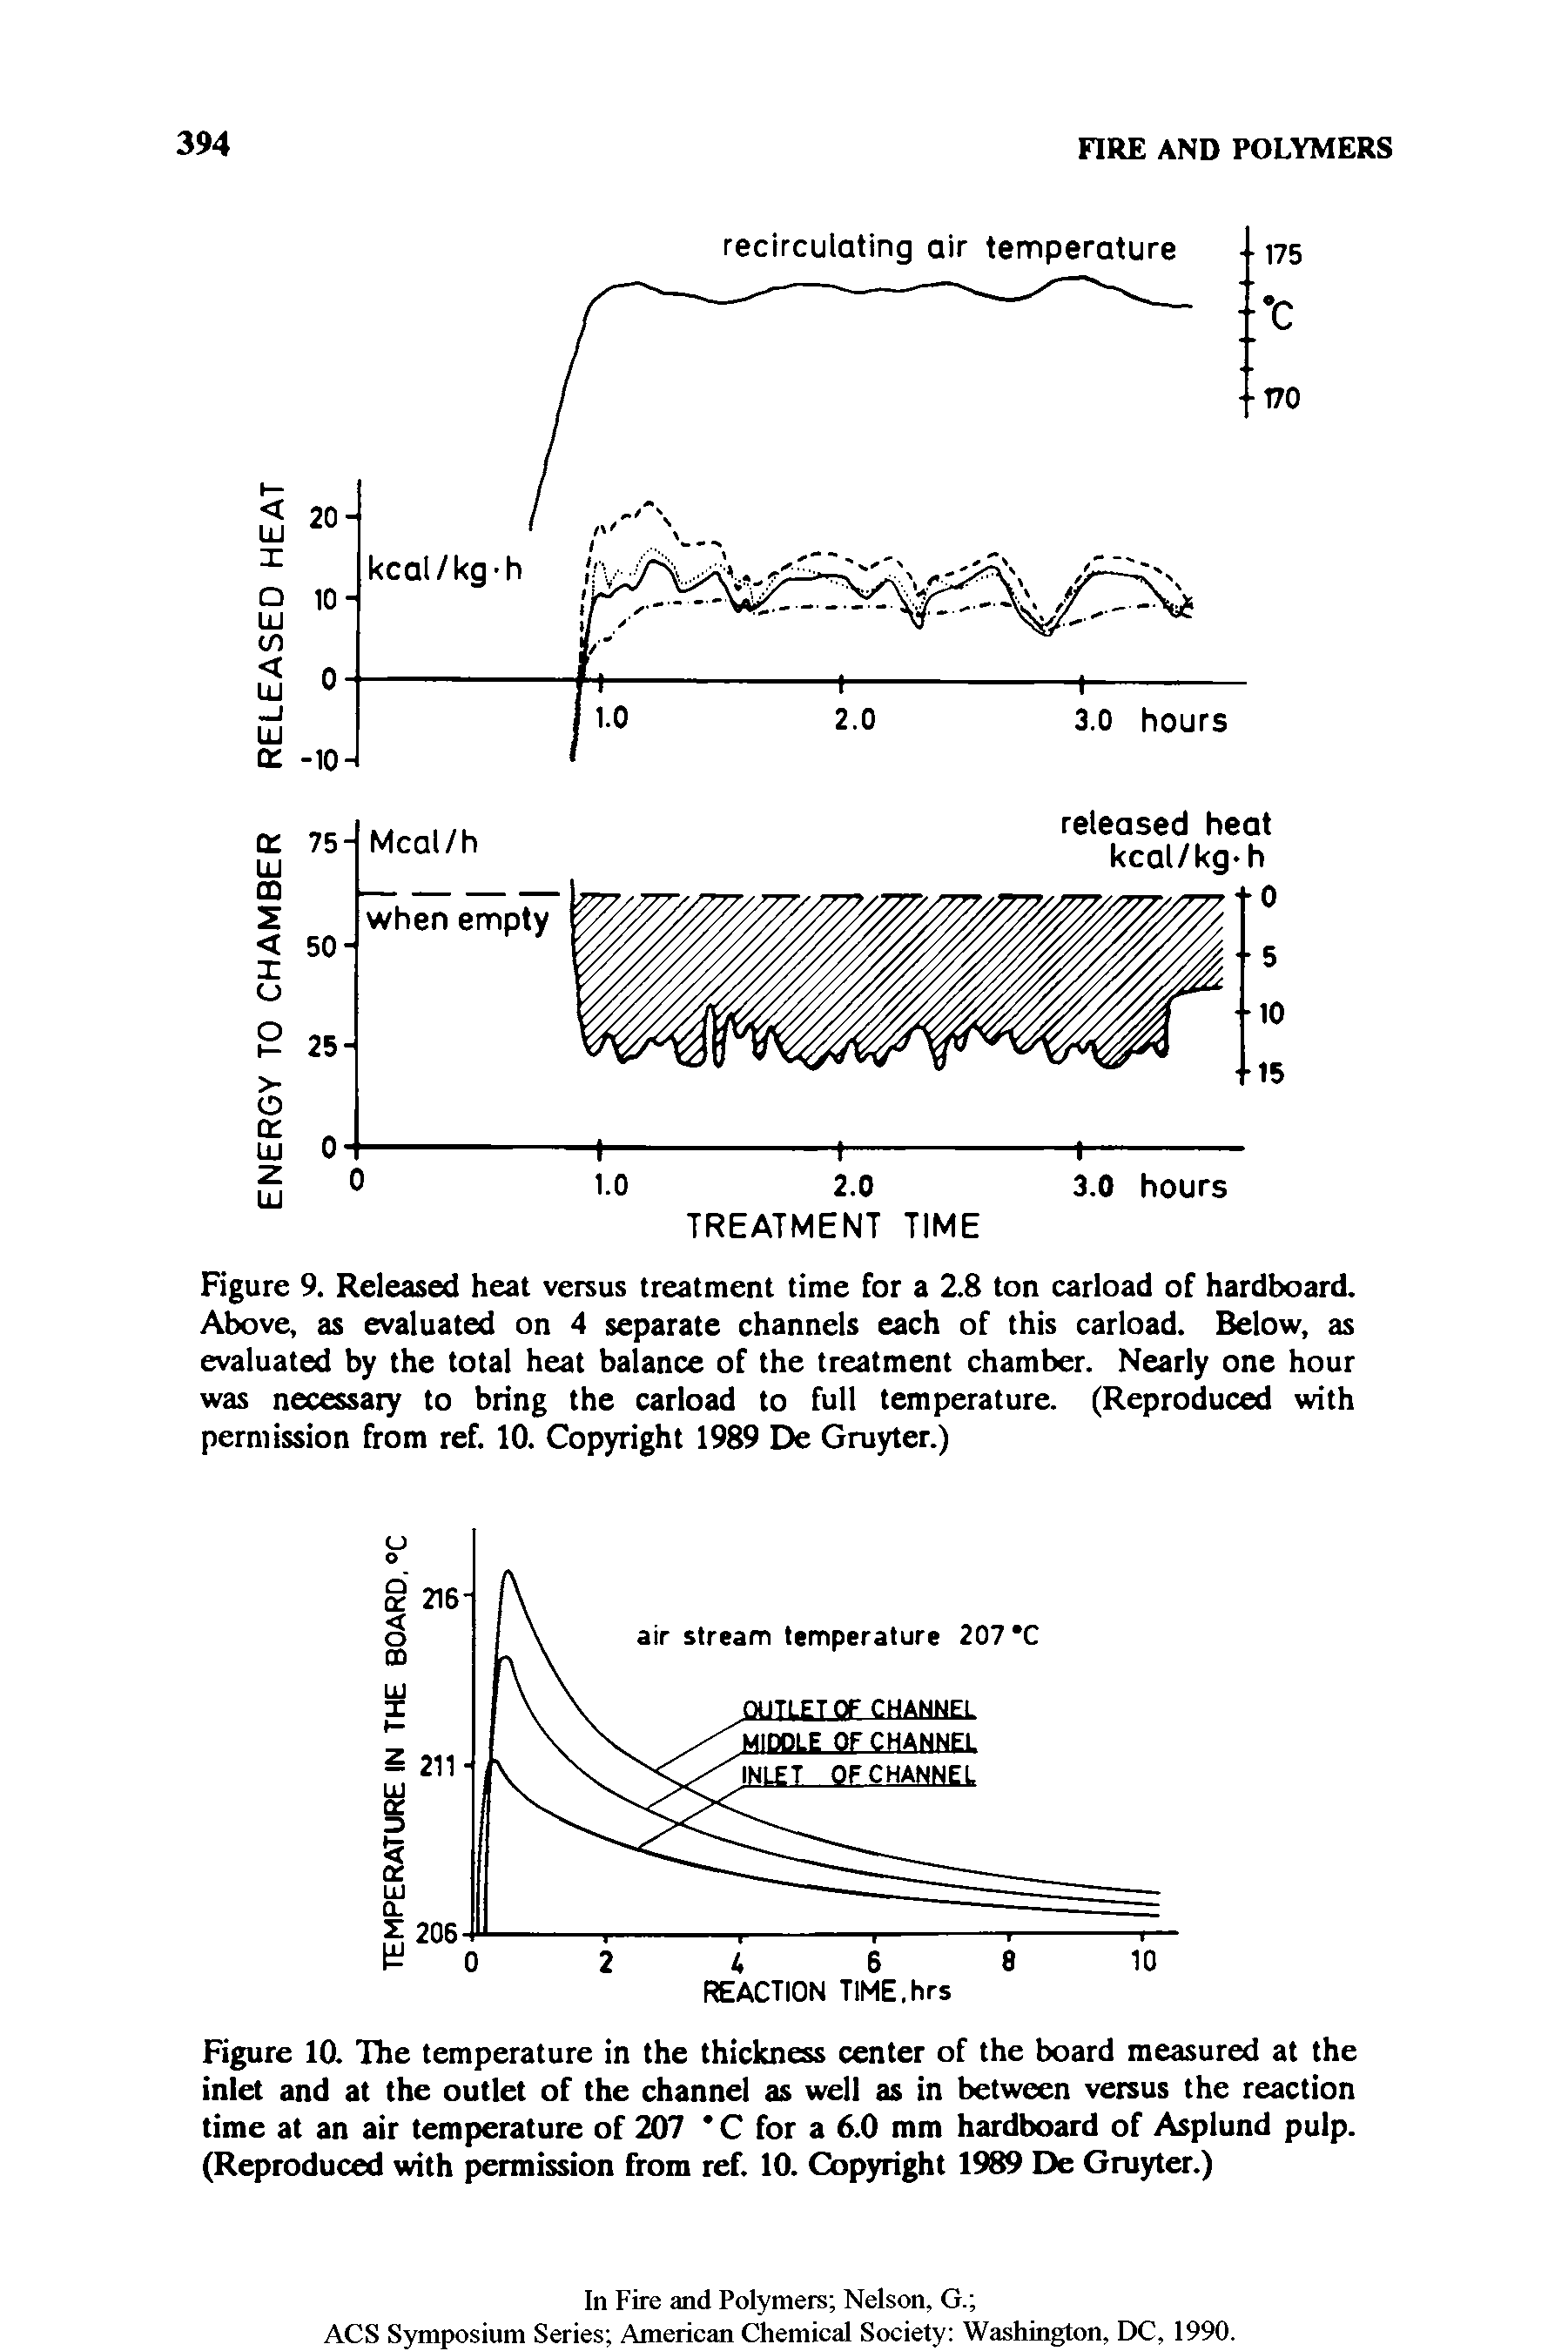 Figure 9. Released heat versus treatment time for a 2.8 ton carload of hardboard. Above, as evaluated on 4 separate channels each of this carload. Below, as evaluated by the total heat balance of the treatment chamber. Nearly one hour was necessary to bring the carload to full temperature. (Reproduced with permission from ref. 10. Copyright 1989 De Gruyter.)...